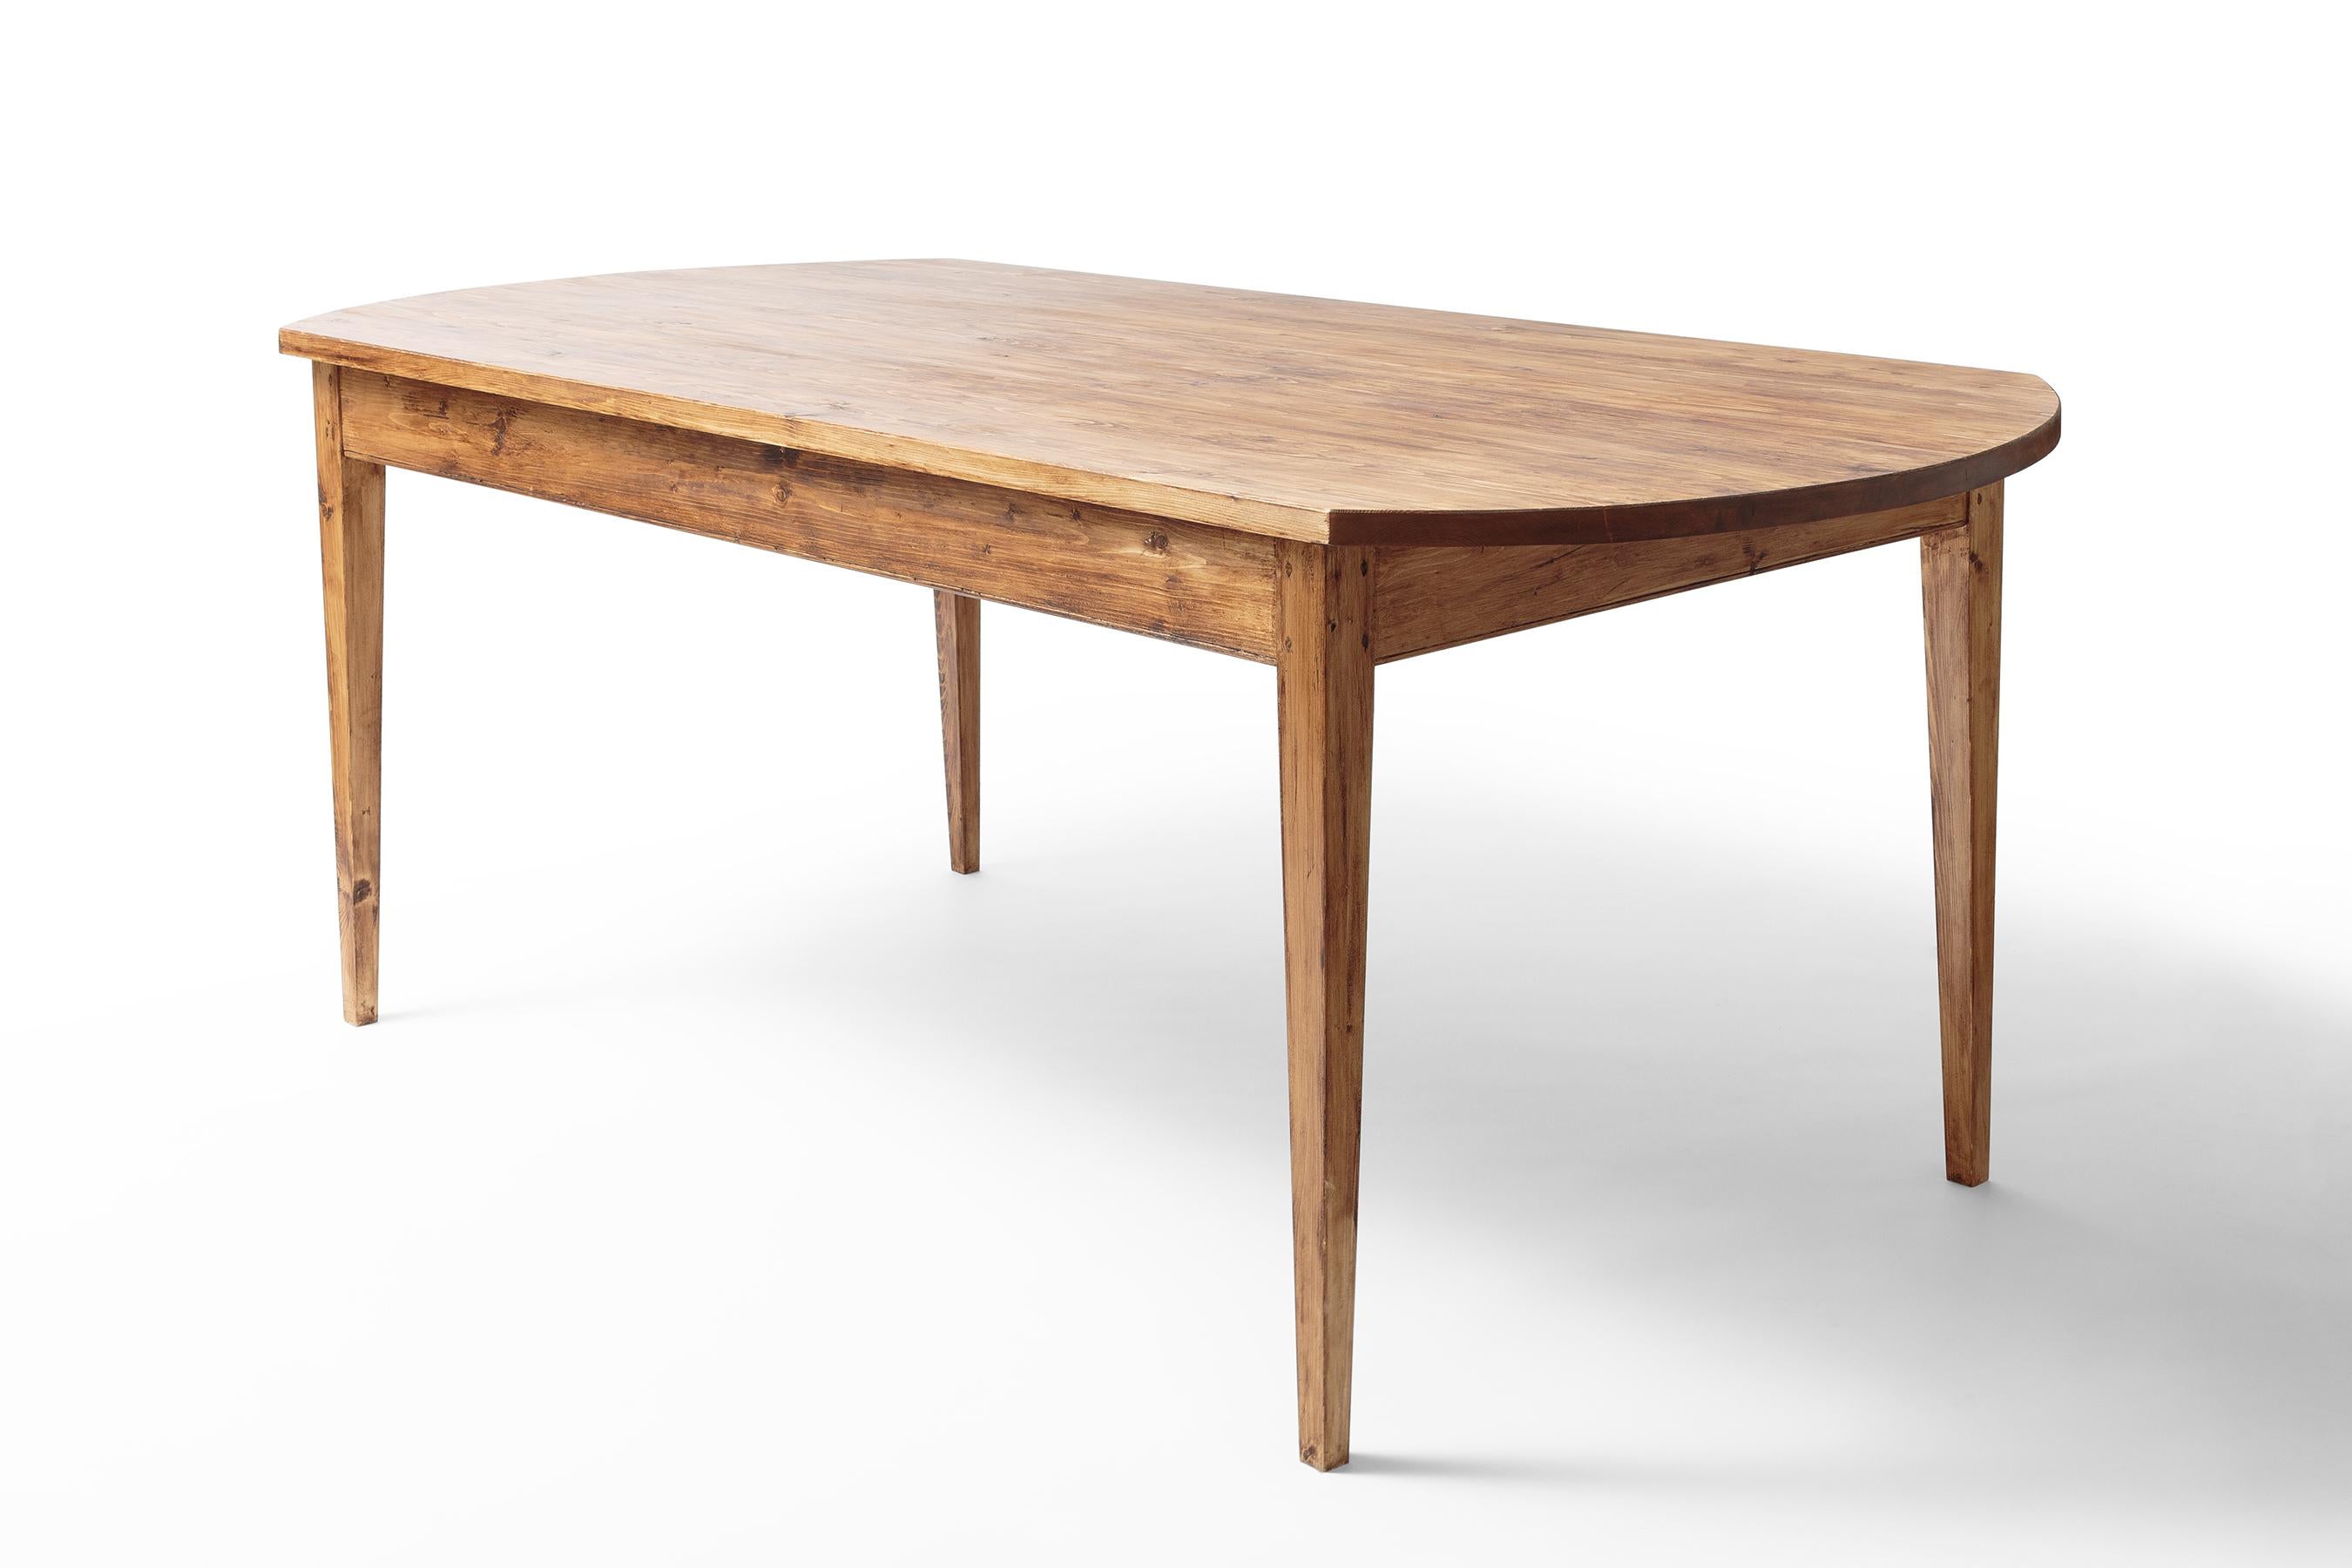 Shaker Adair Table, Refined English Rustic Dining Table in Pine For Sale